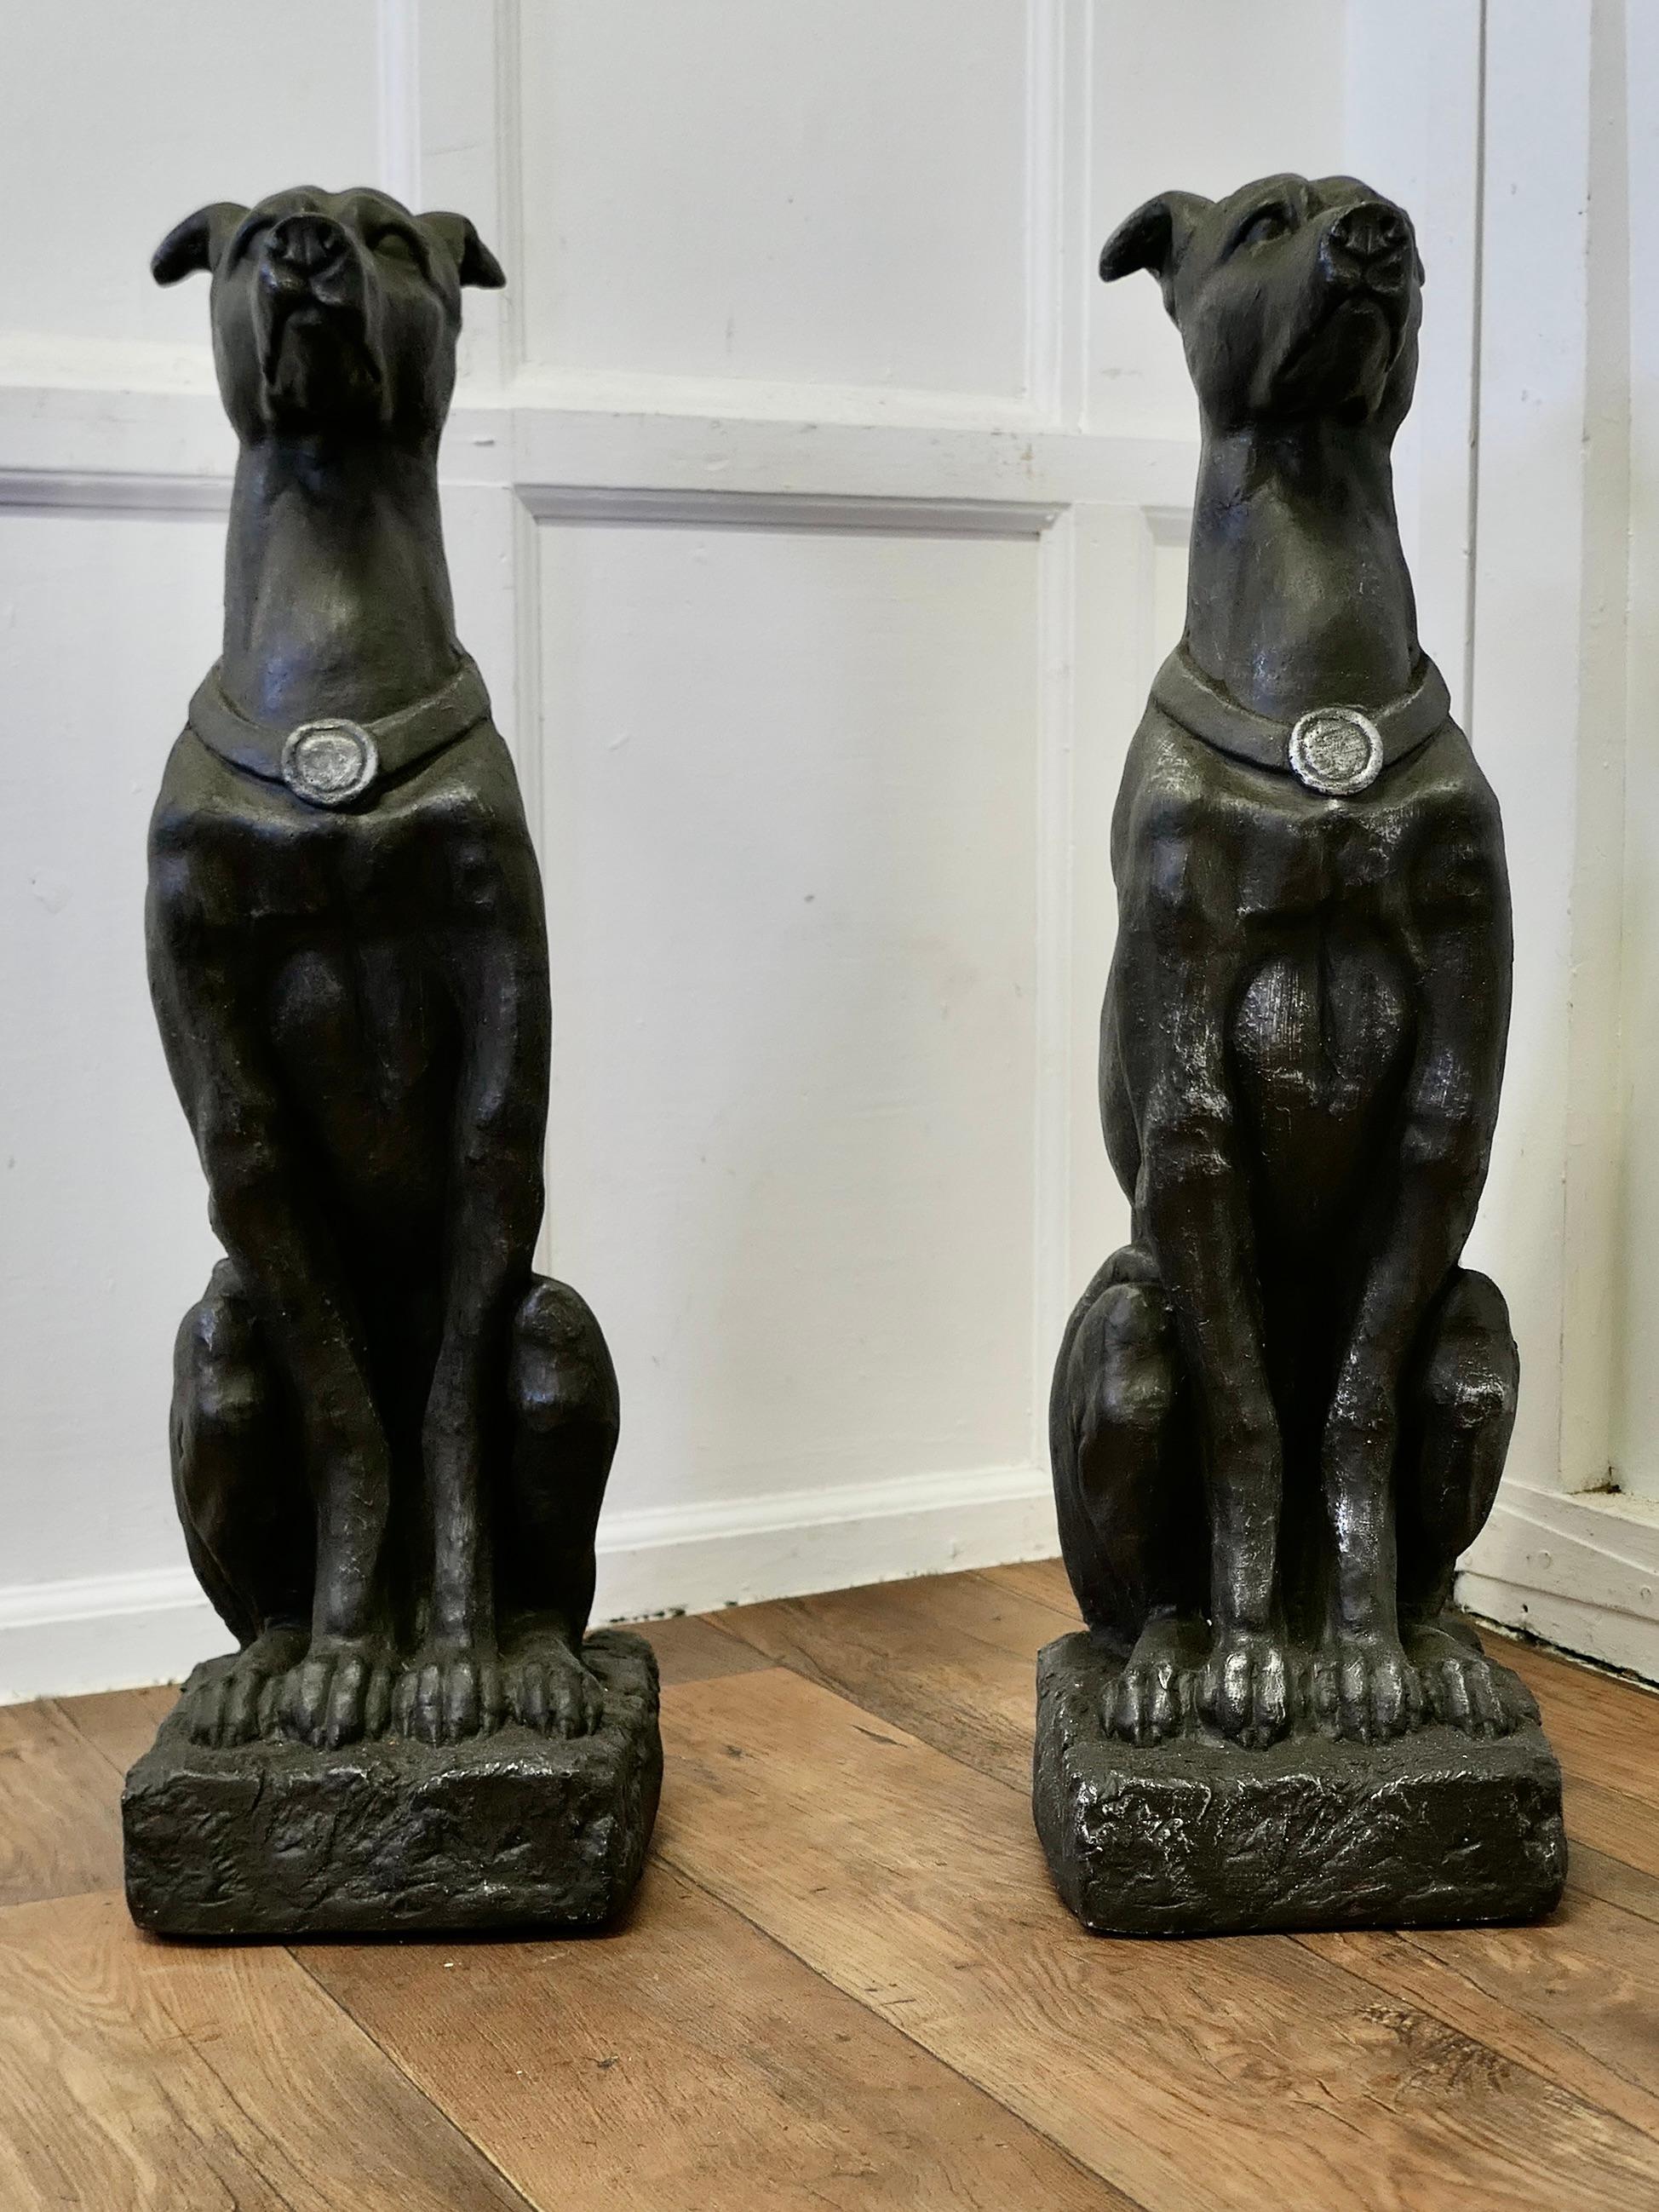 Pair of Large Sculptured Greyhound Dogs

This Super pair of Dogs has a good patina they appear to be made with an old polished steel finish
They are in very good condition with a beautifully aged patina

Greyhounds are 31” tall, and sit on a 10”